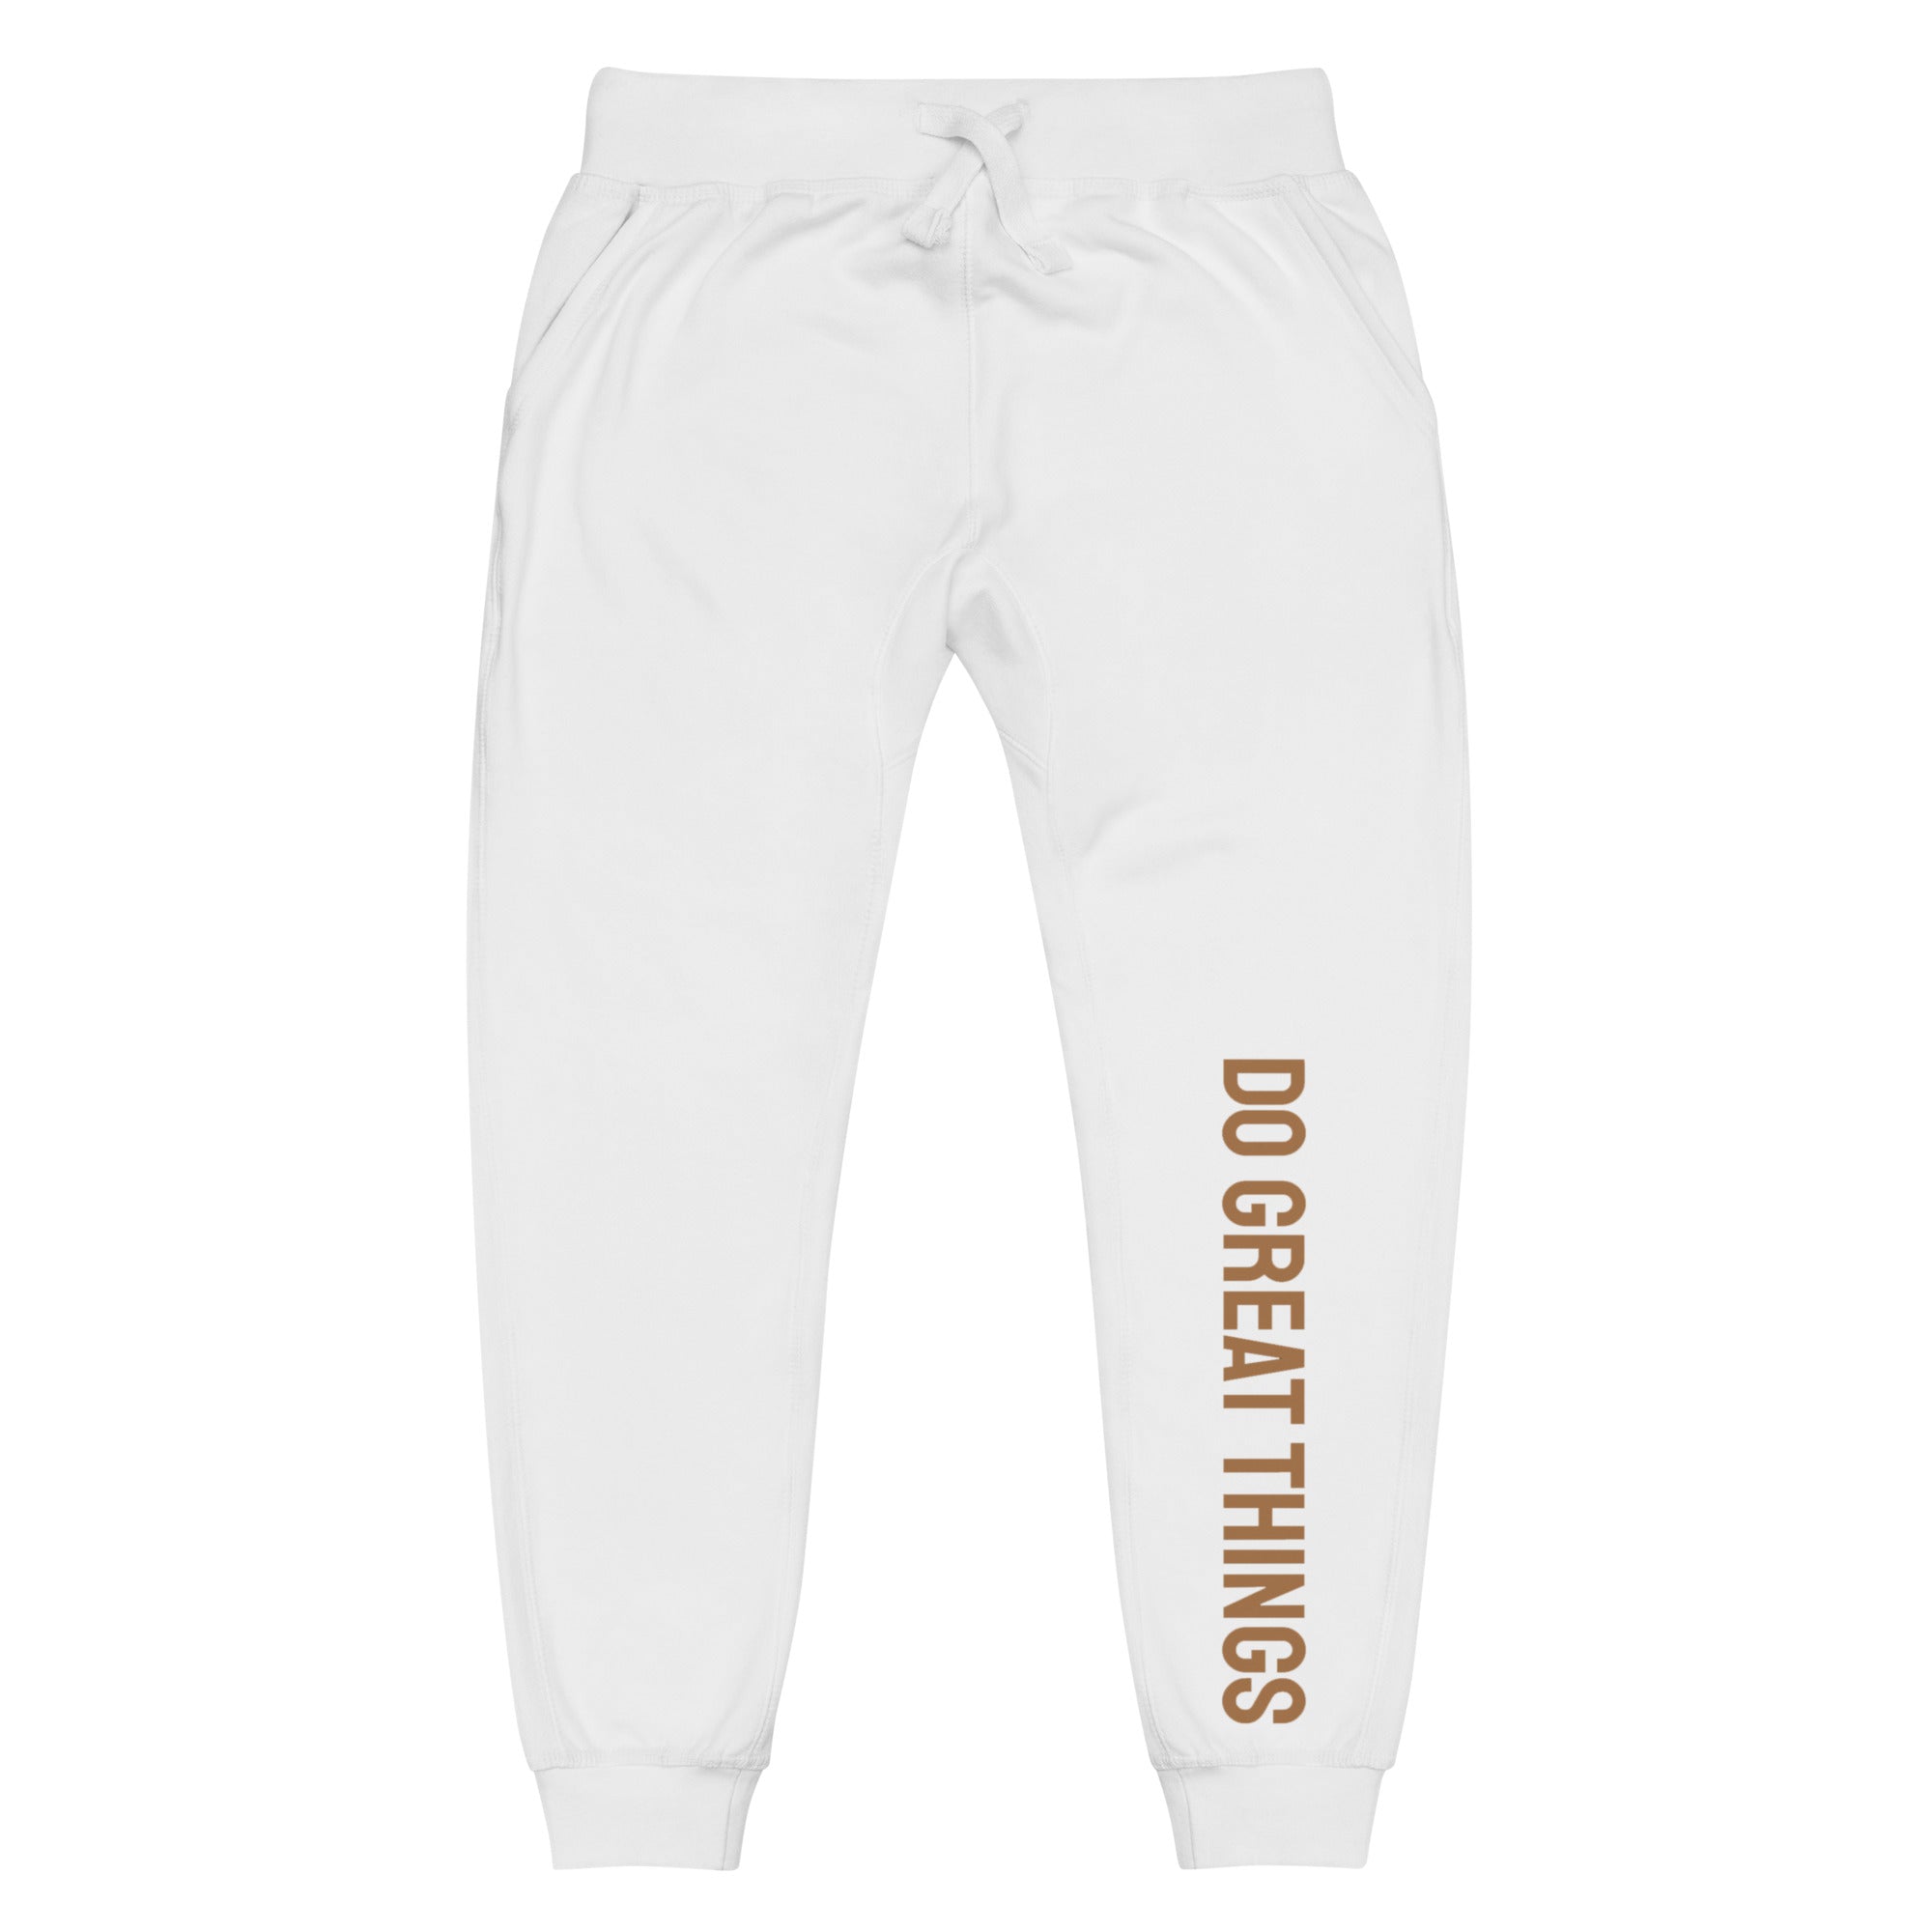 Time to Get Up and Move!! DGT Joggers - Unisex fleece sweatpants